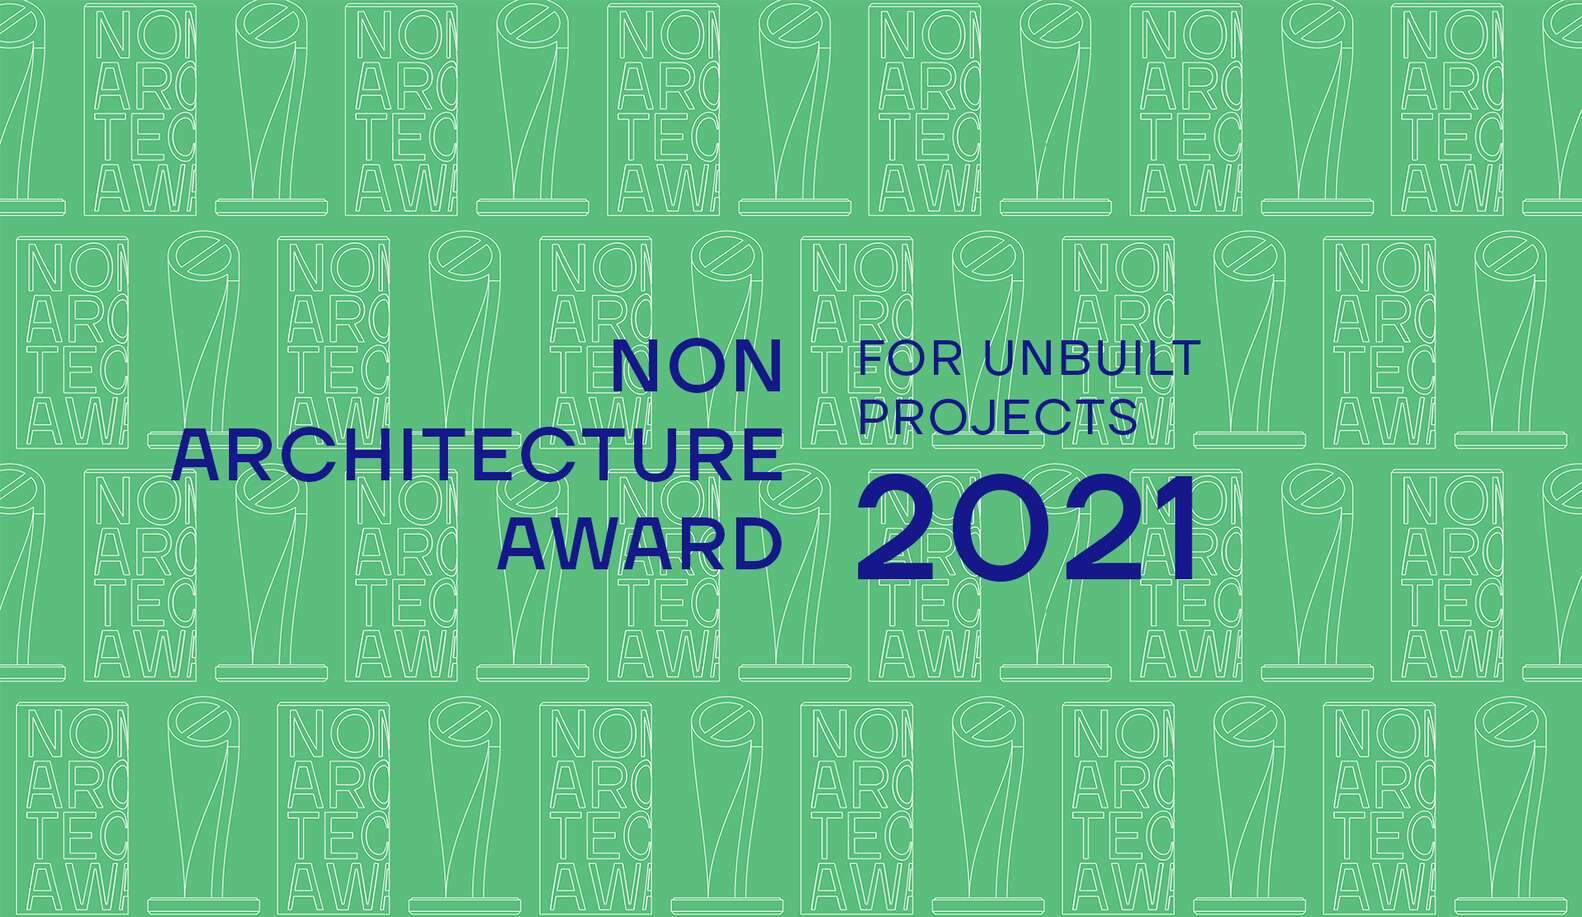 NON ARCHITECTURE AWARD FOR UNBUILT PROJECTS 2021